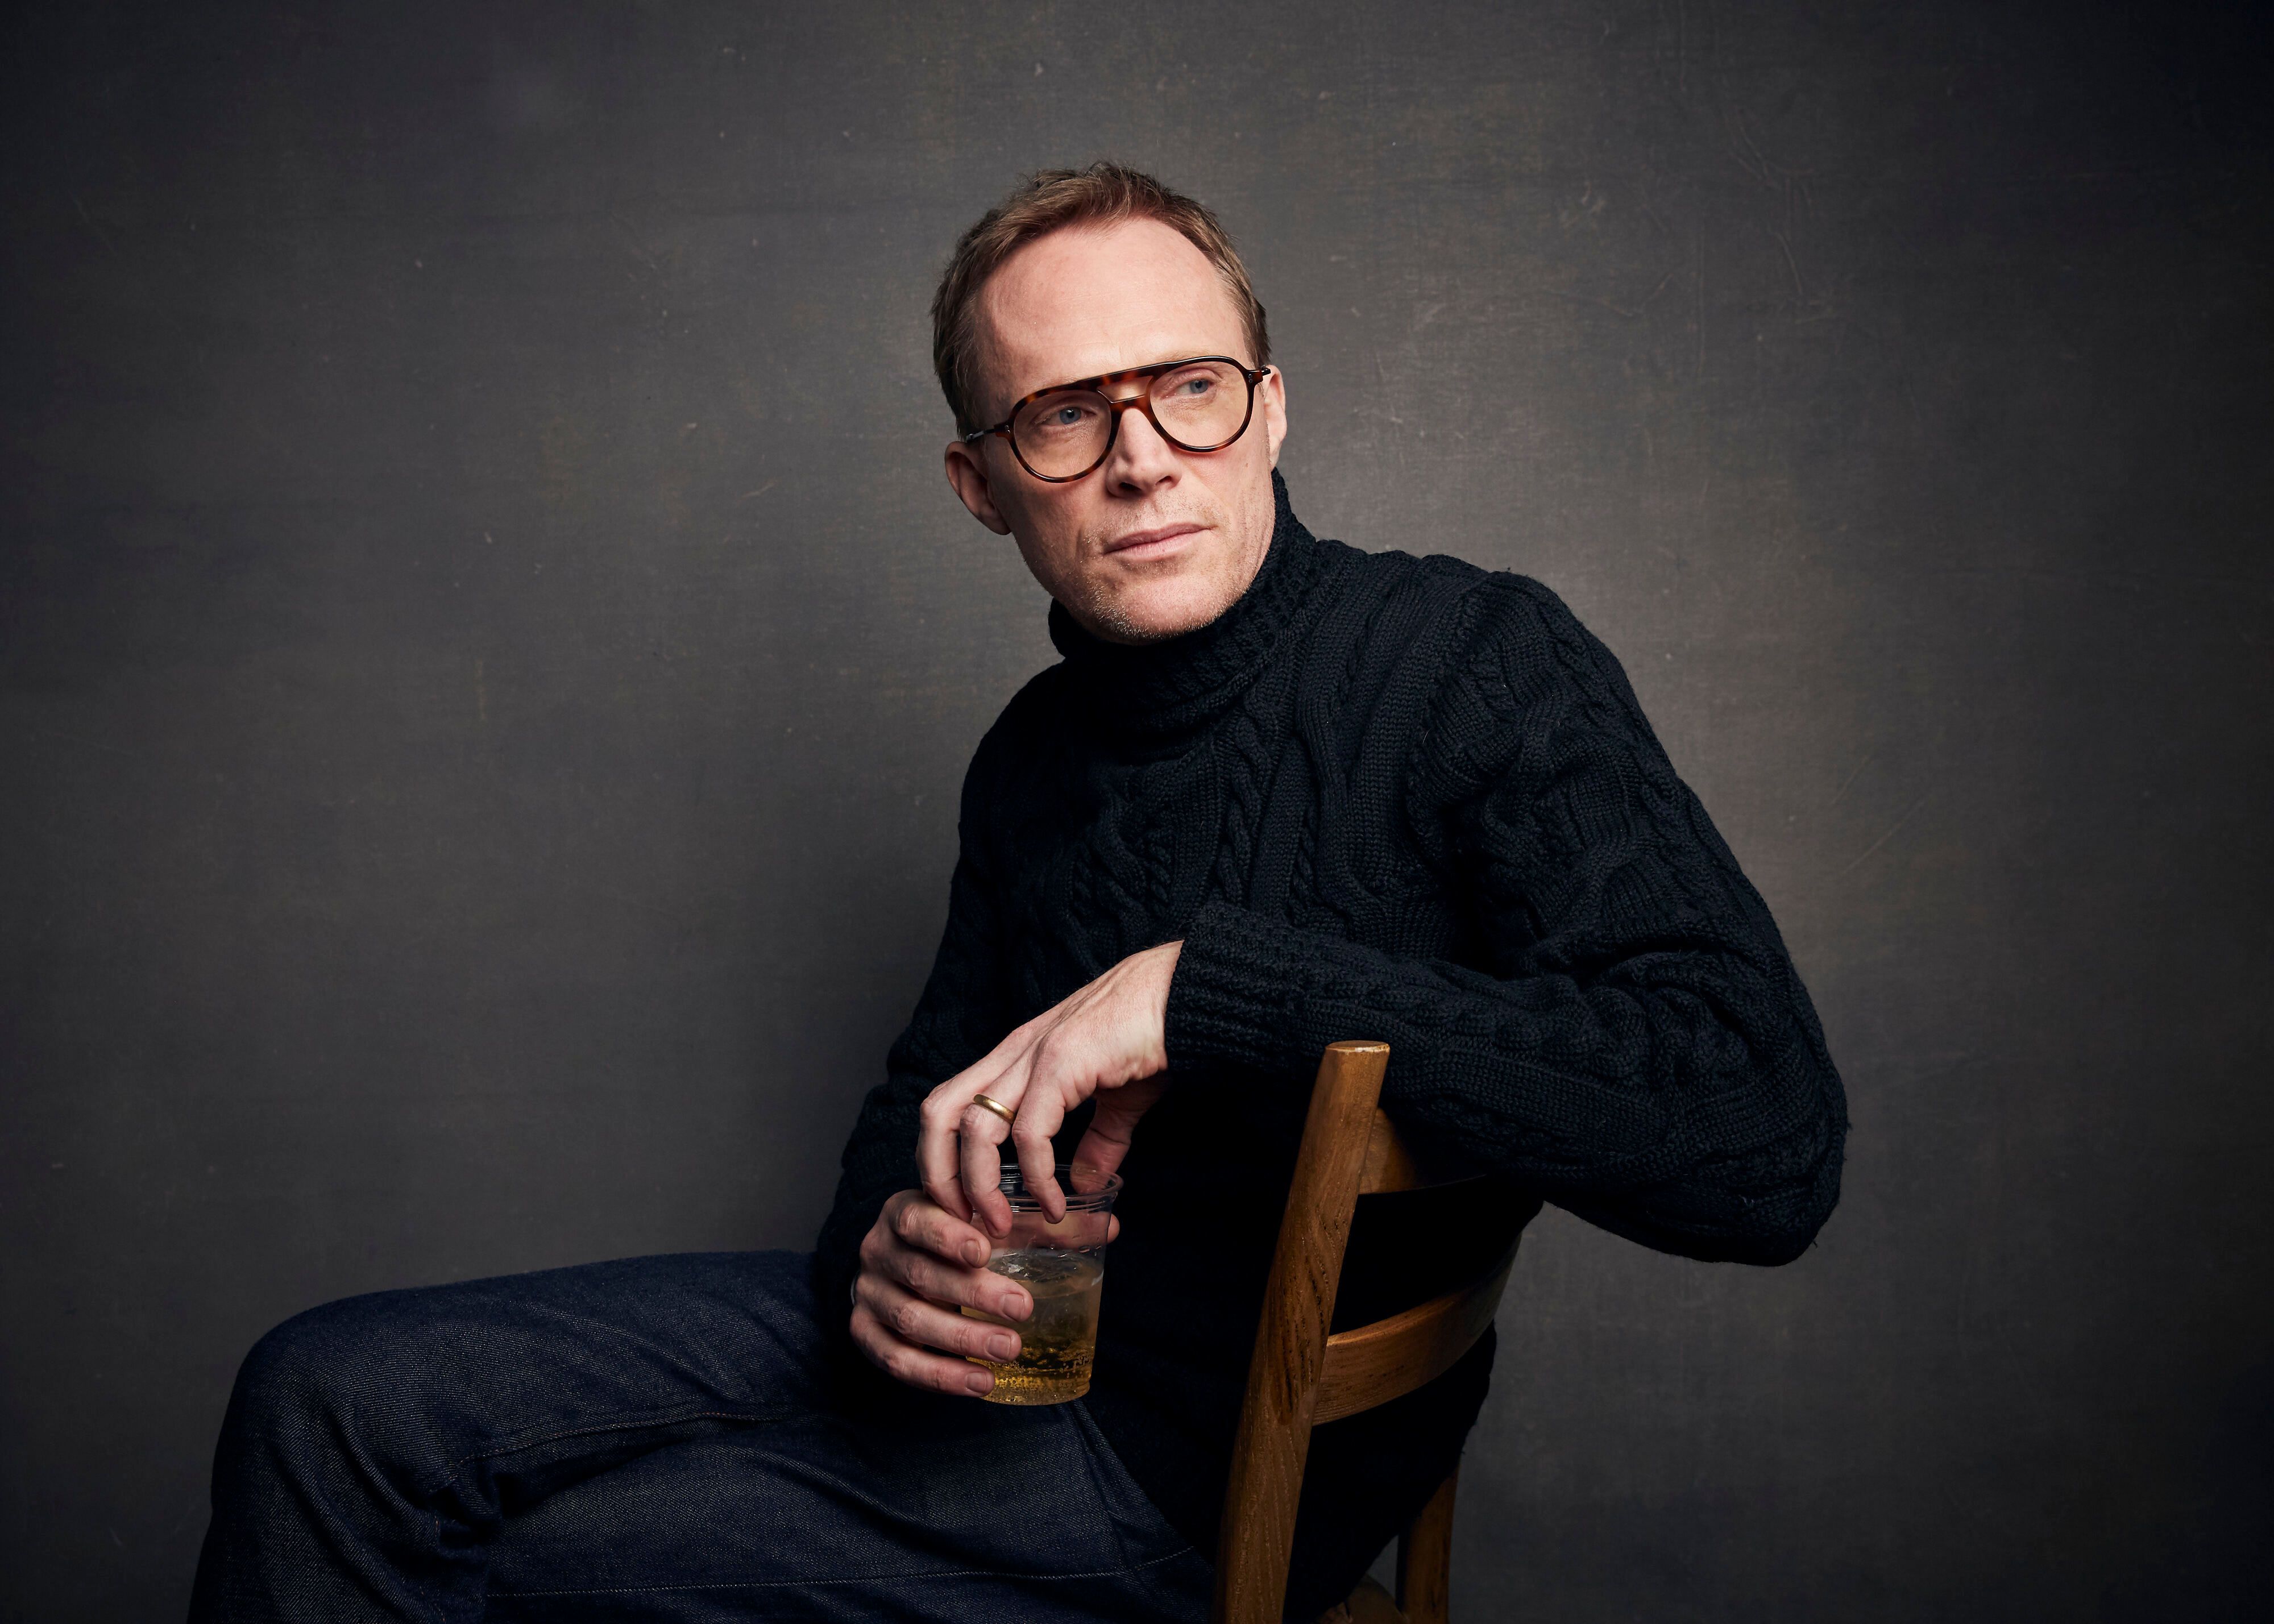 wandavisions Paul Bettany Explains Whether Vision Is Alive Or Dead